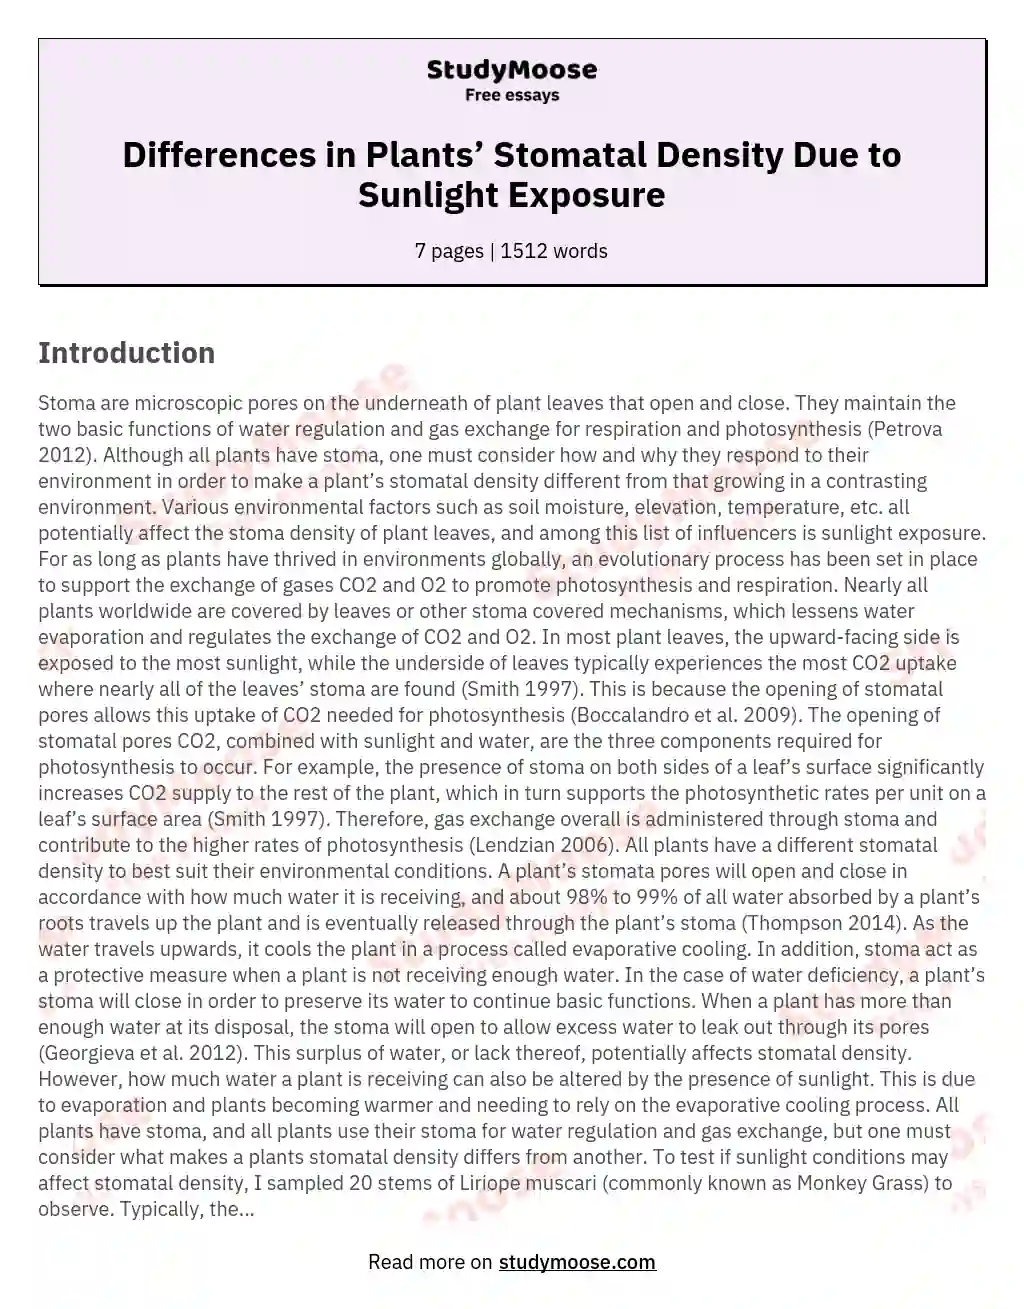 Differences in Plants’ Stomatal Density Due to Sunlight Exposure essay